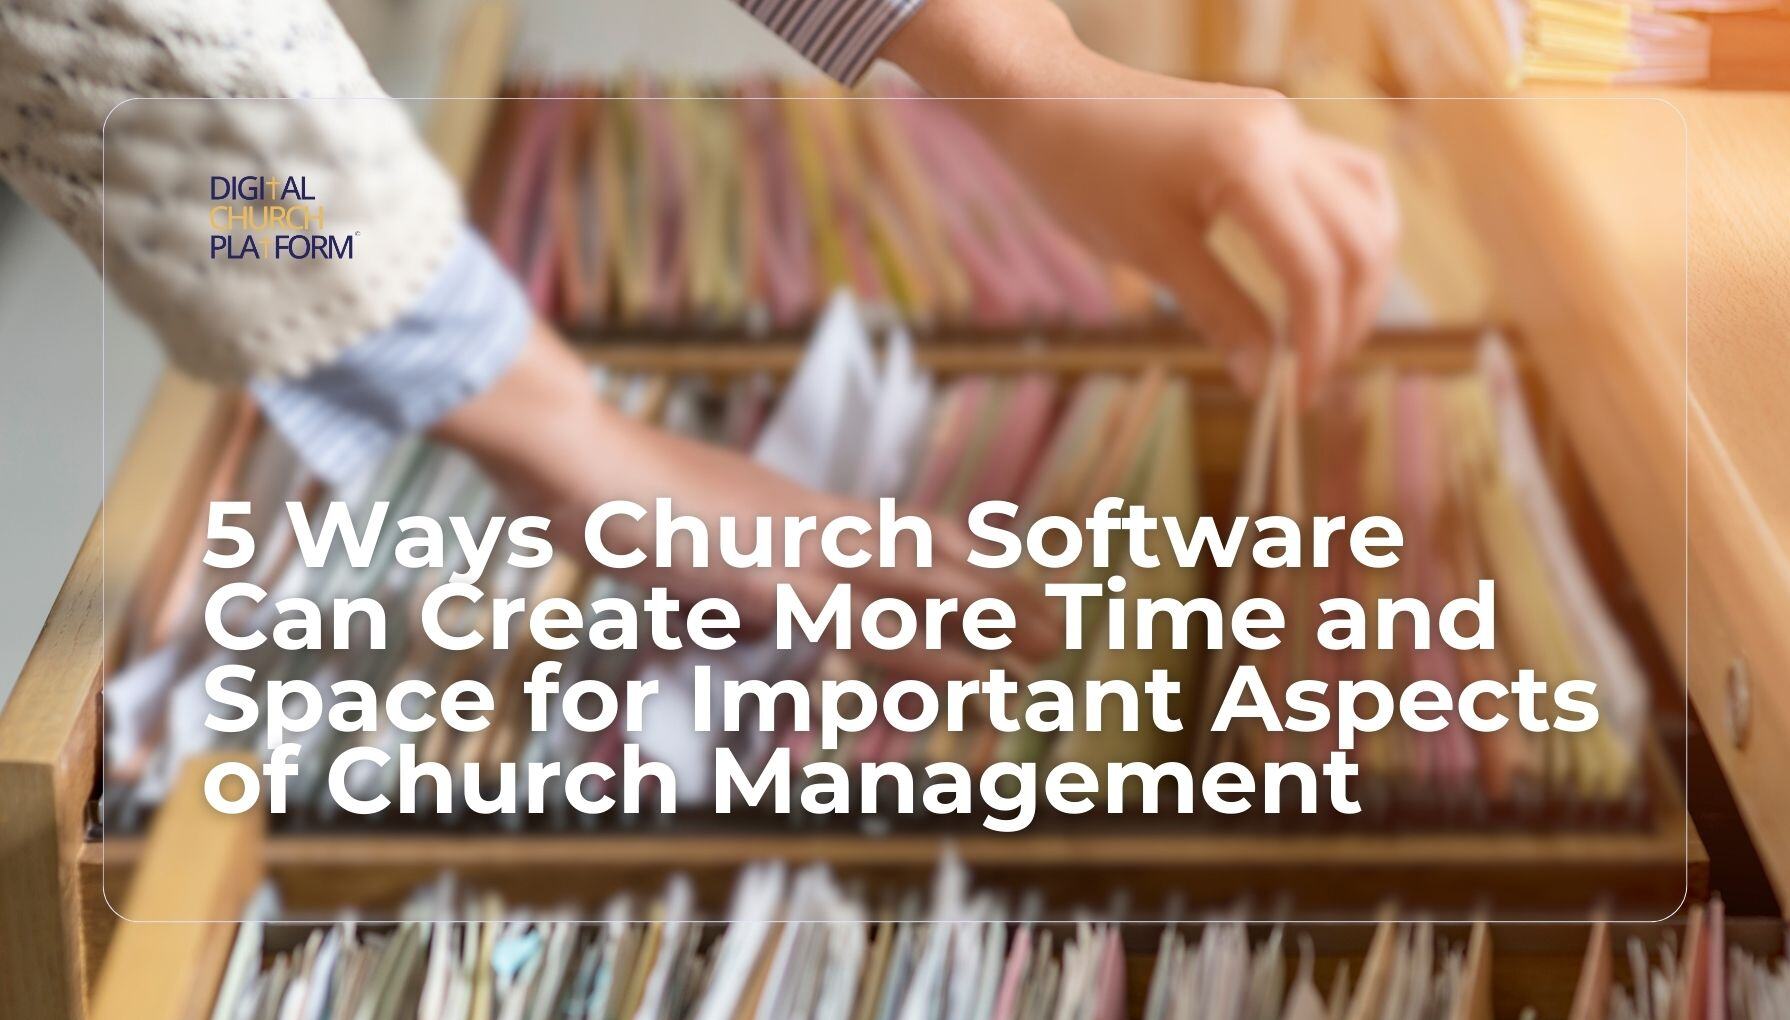 https://thedigitalchurchplatform.com/hubfs/5%20Ways%20Church%20Software%20Can%20Create%20More%20Time%20and%20Space%20for%20Important%20Aspects%20of%20Church%20Management%20-1.jpg